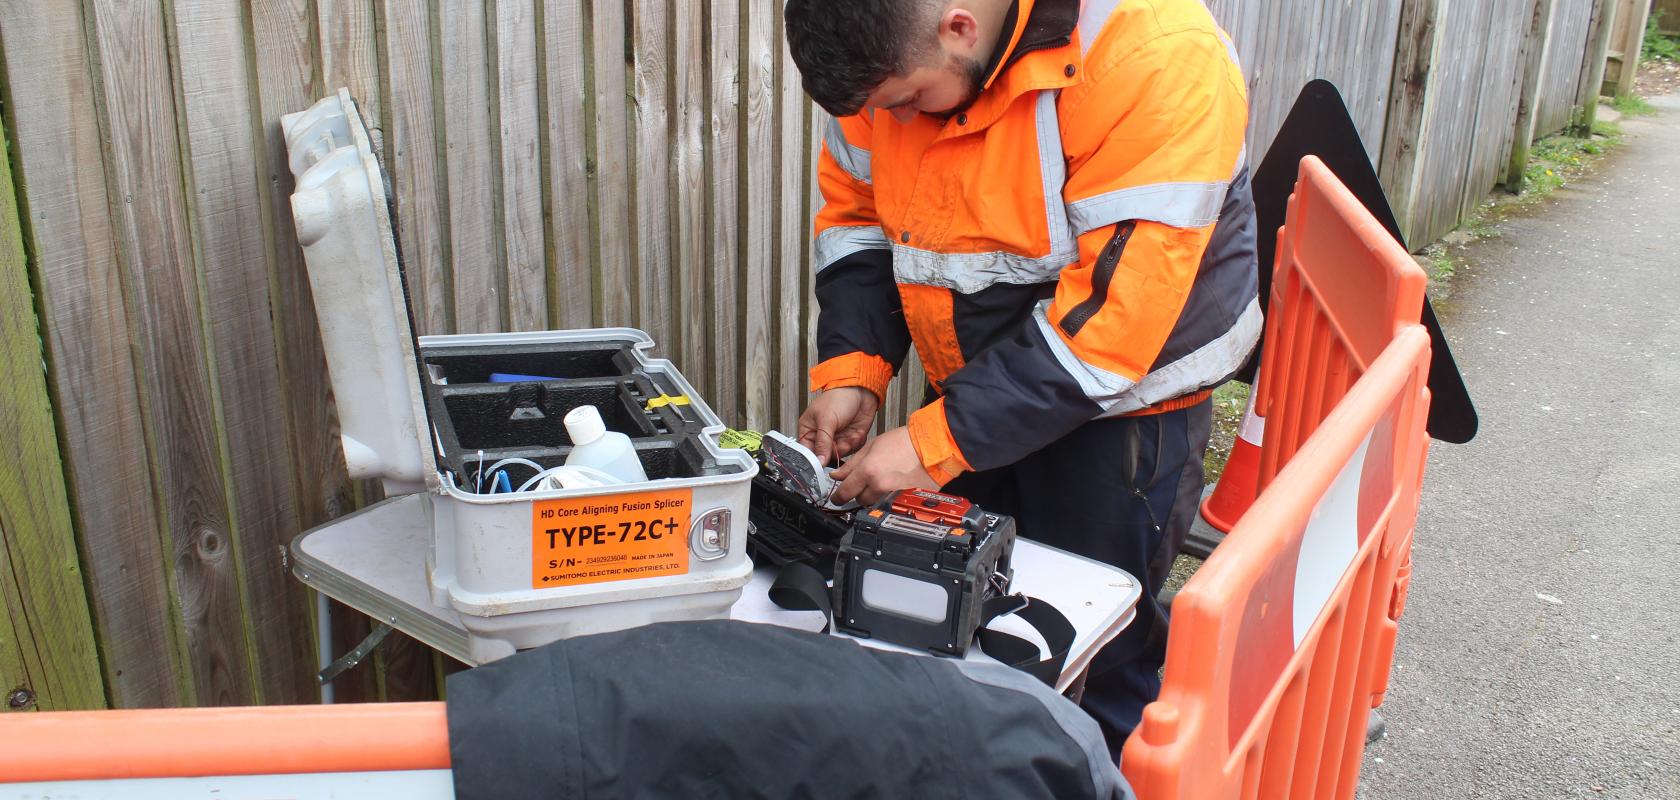 F&W Networks is increasing its rollout of full-fibre across the south of England